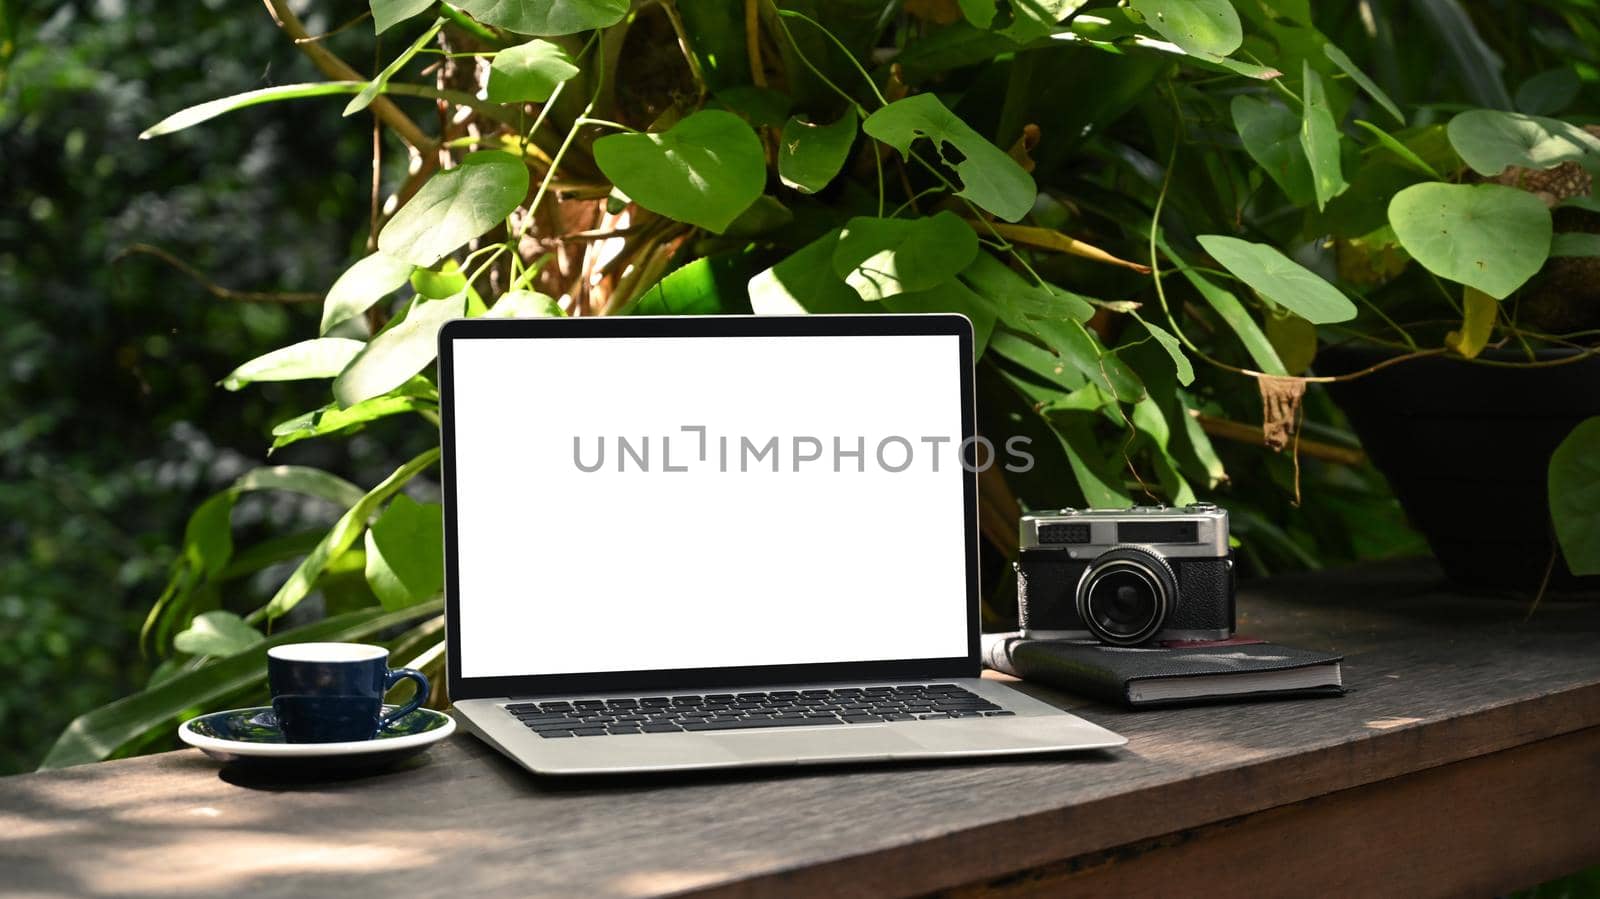 Computer laptop with white screen, coffee cup and camera on wooden table in the green garden.